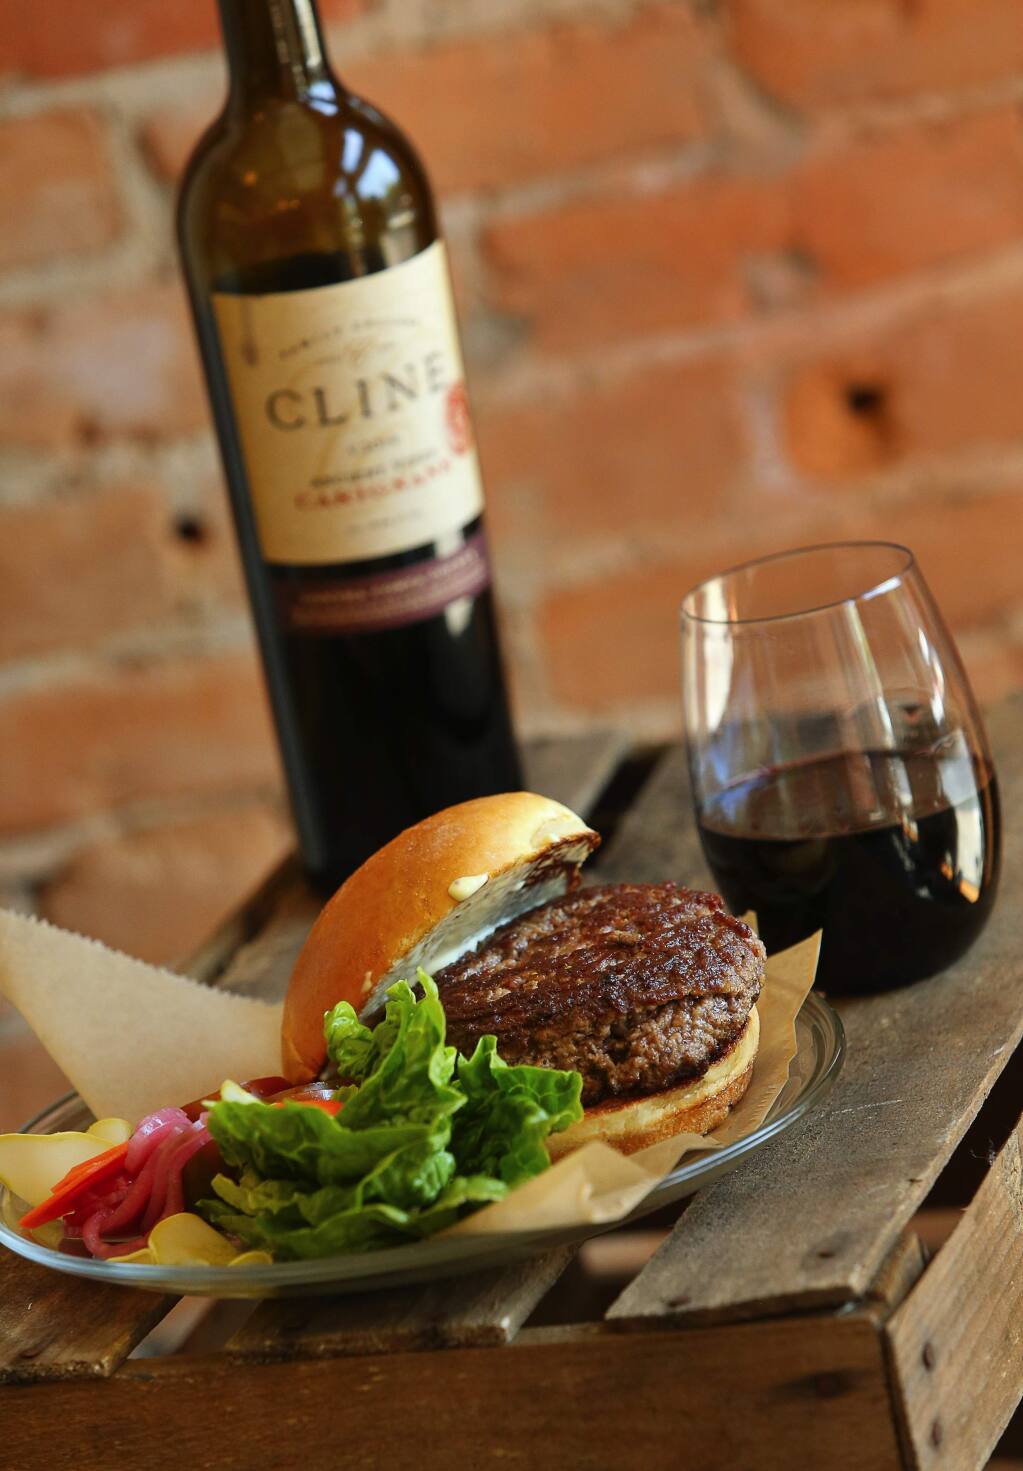 Bacon and grass-fed beef burger created by Travis Day, owner and butcher of Thistle Meats in Petaluma. The burger is paired with Cline Family Cellars 2014 Carignane.(Christopher Chung/ The Press Democrat)